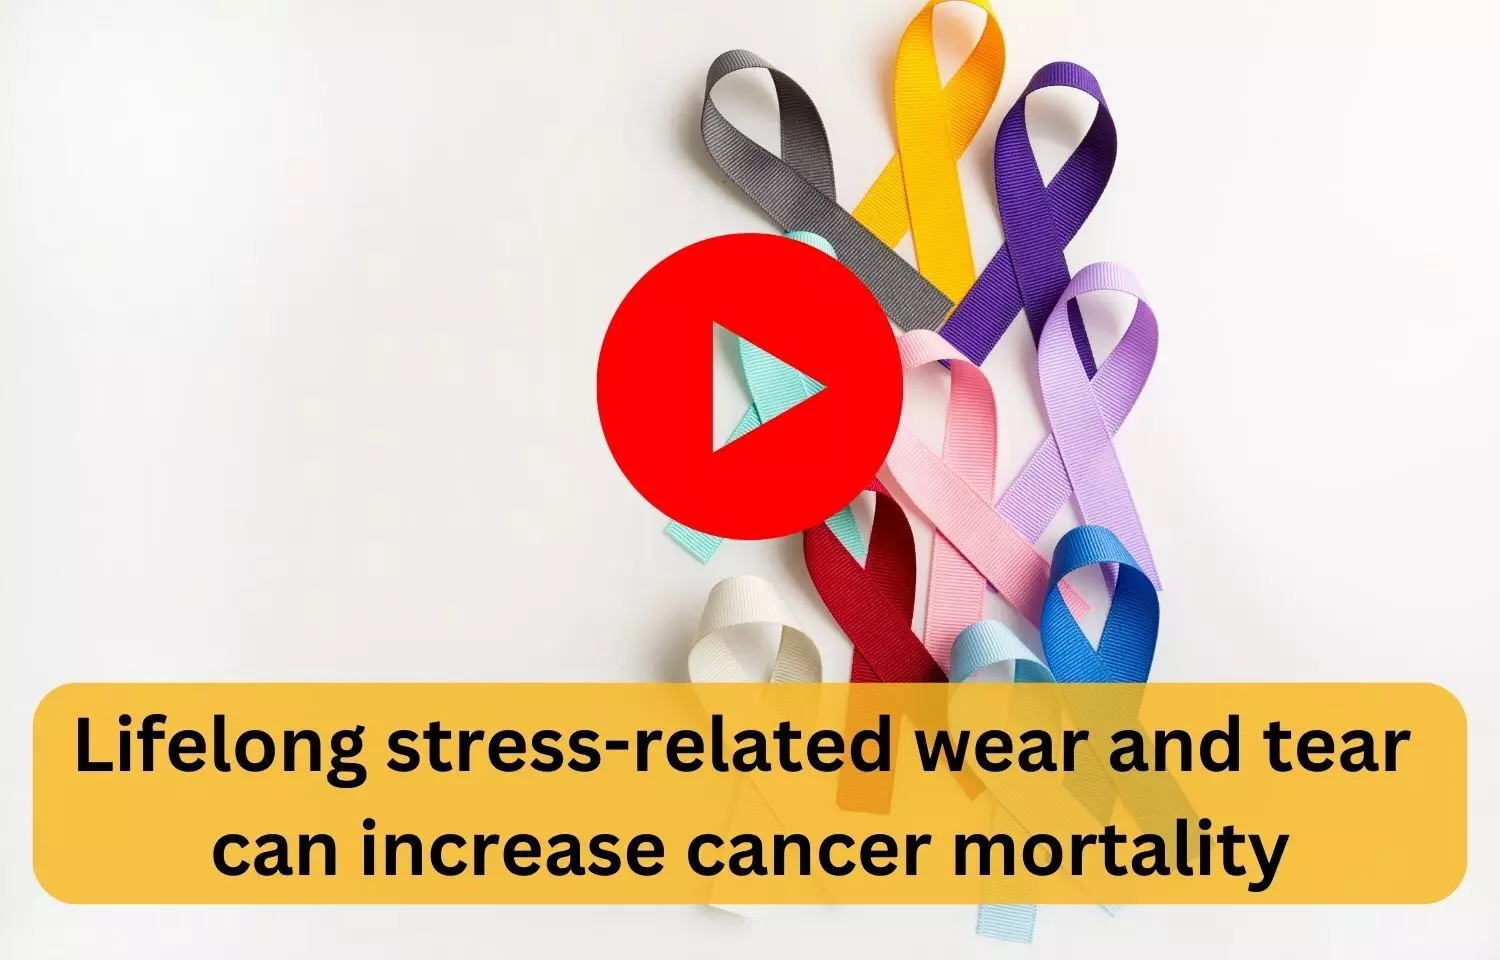 Lifelong stress-related wear and tear can increase cancer mortality